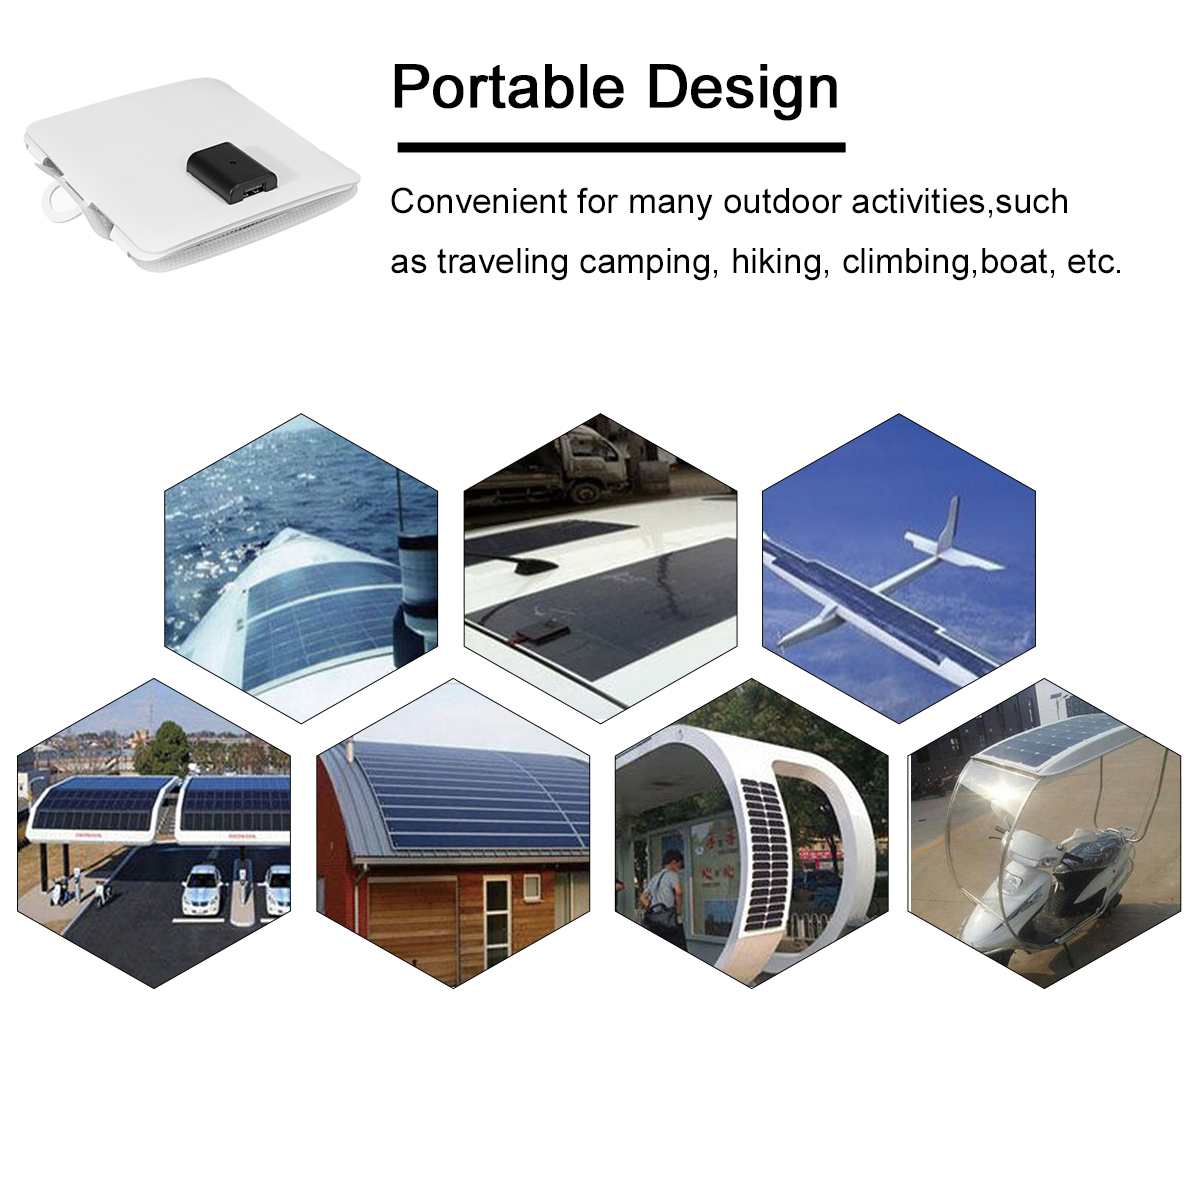 7W-Foldable-Solar-Panel-USB-Output-Port-Portable-Monocrystalline-Charging-Panel-Outdoor-Camping-Emer-1900305-5